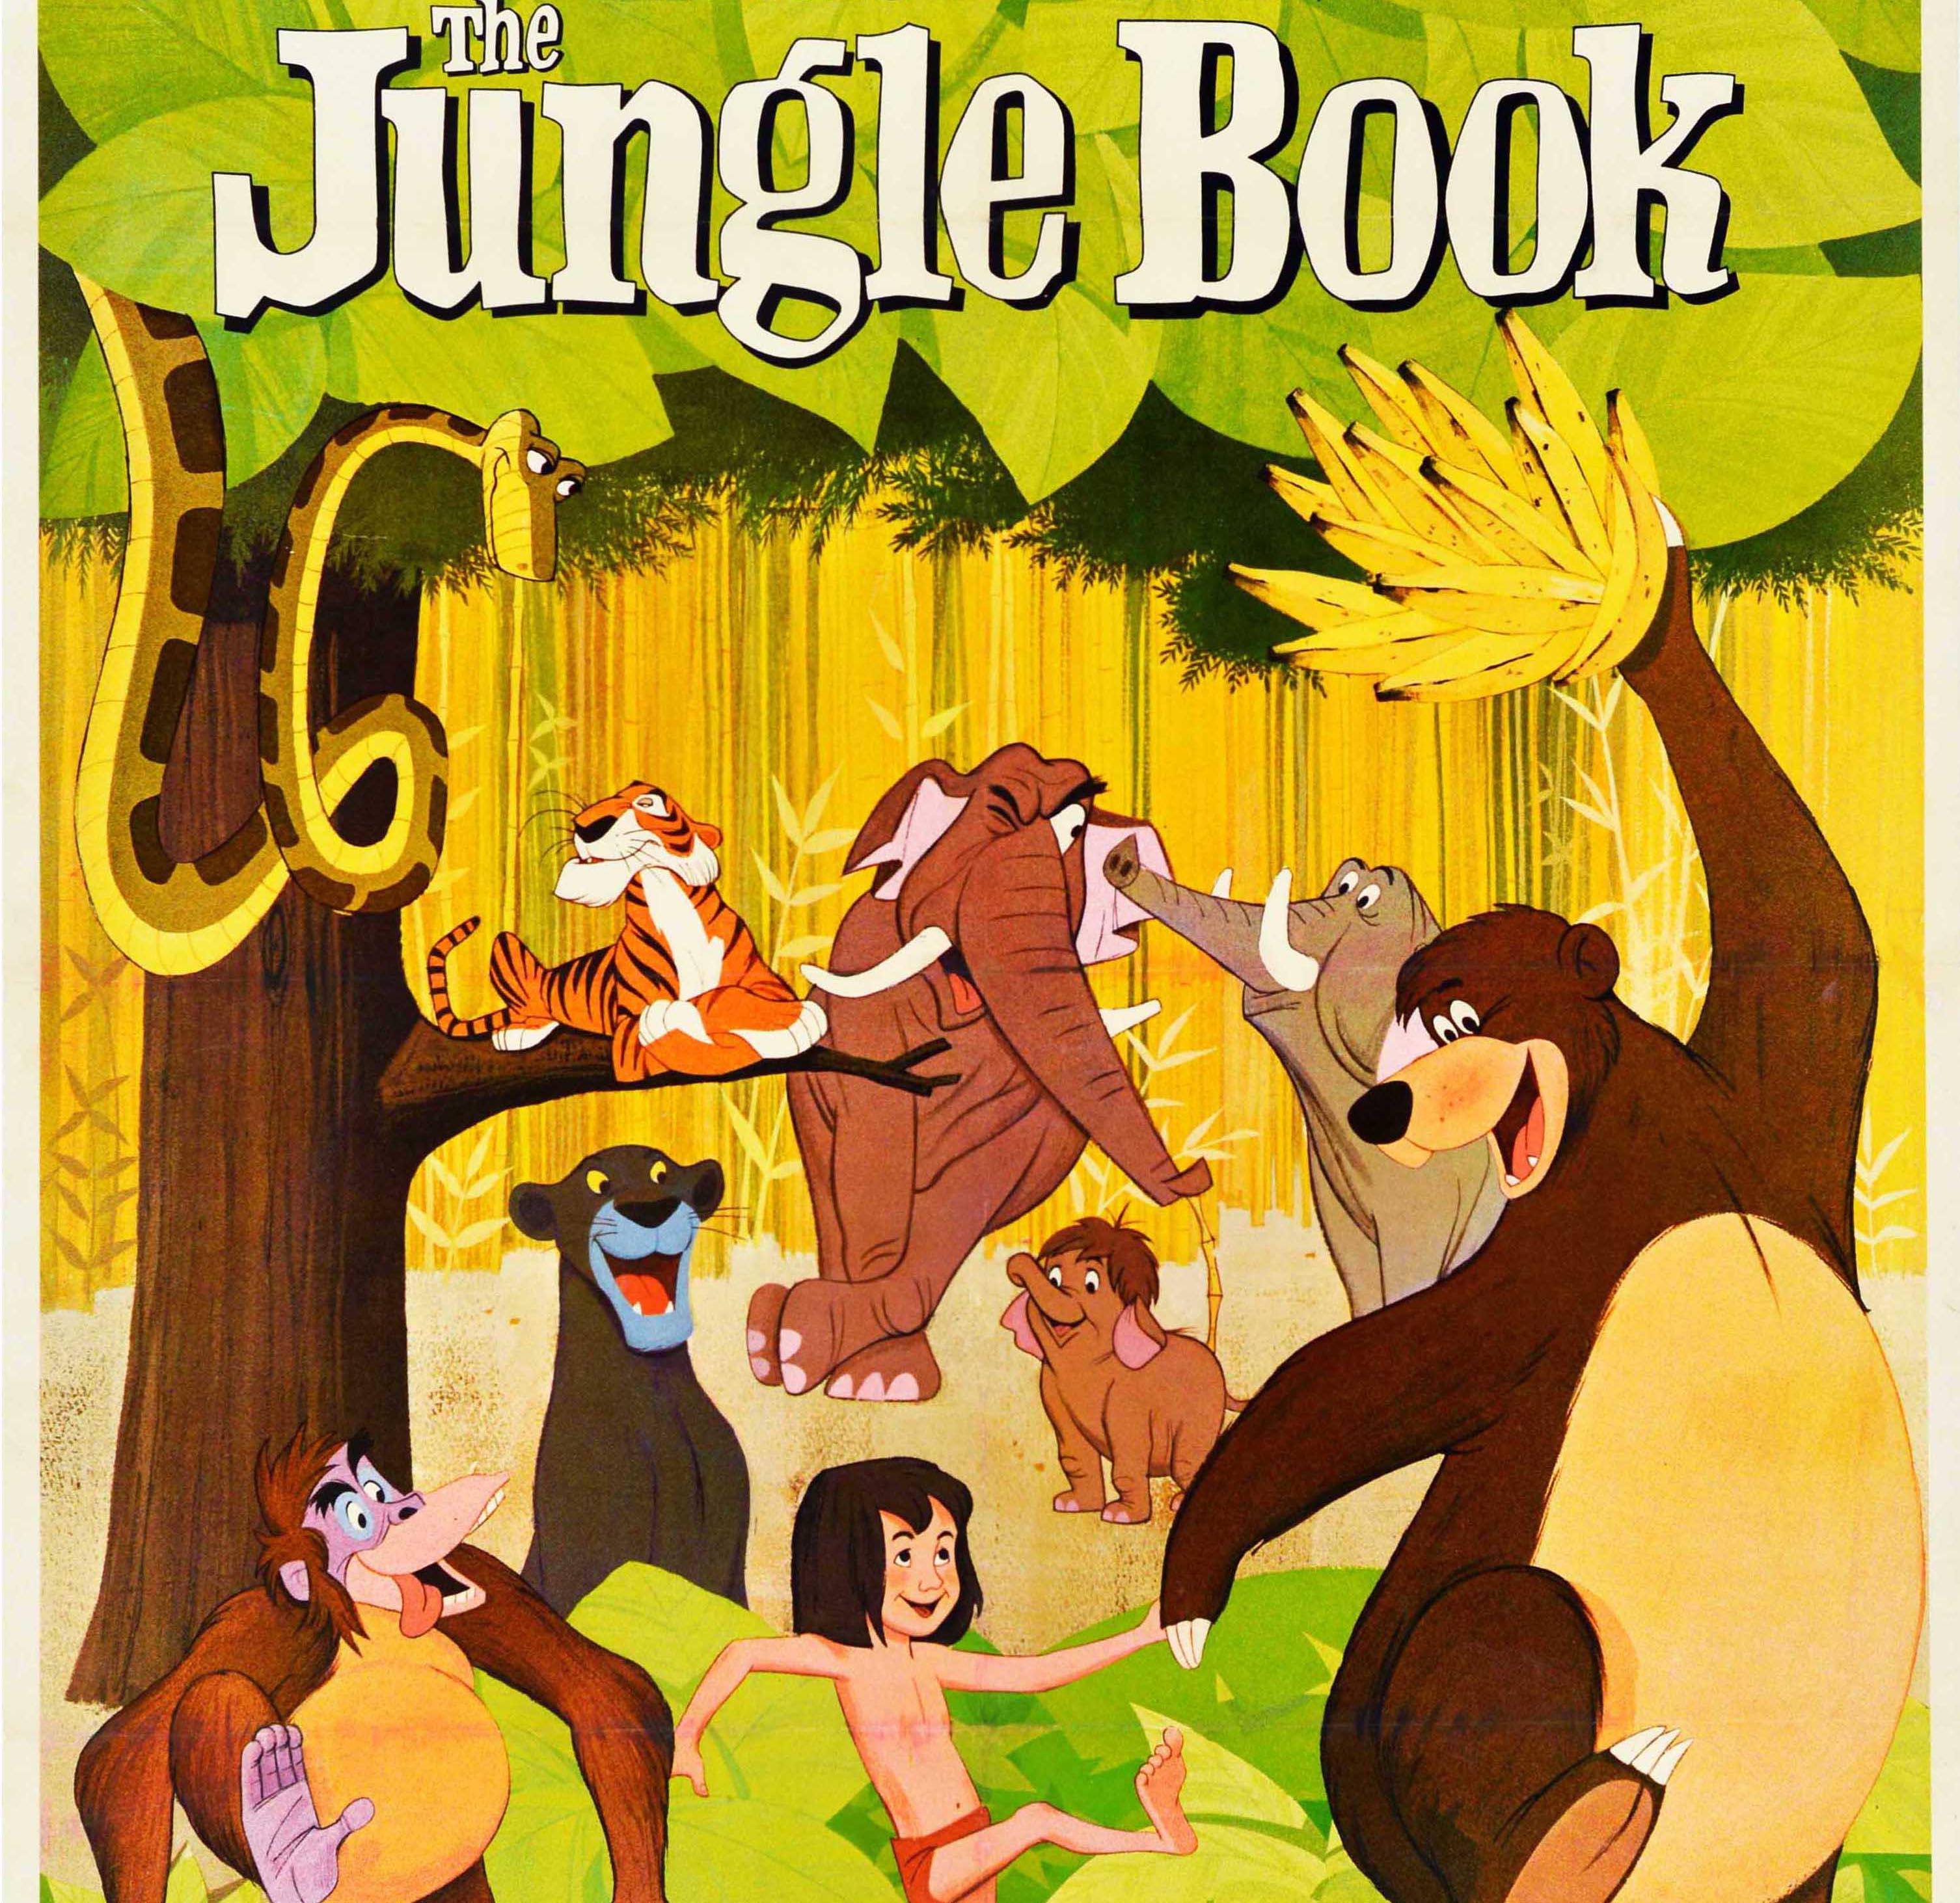 Original vintage film poster for Walt Disney's classic animated family movie The Jungle Book based on the 1894 book by Rudyard Kipling with the voices of Bruce Reitherman as Mowgli the man cub, Phil Harris as Baloo the bear, Sebastian Cabot as